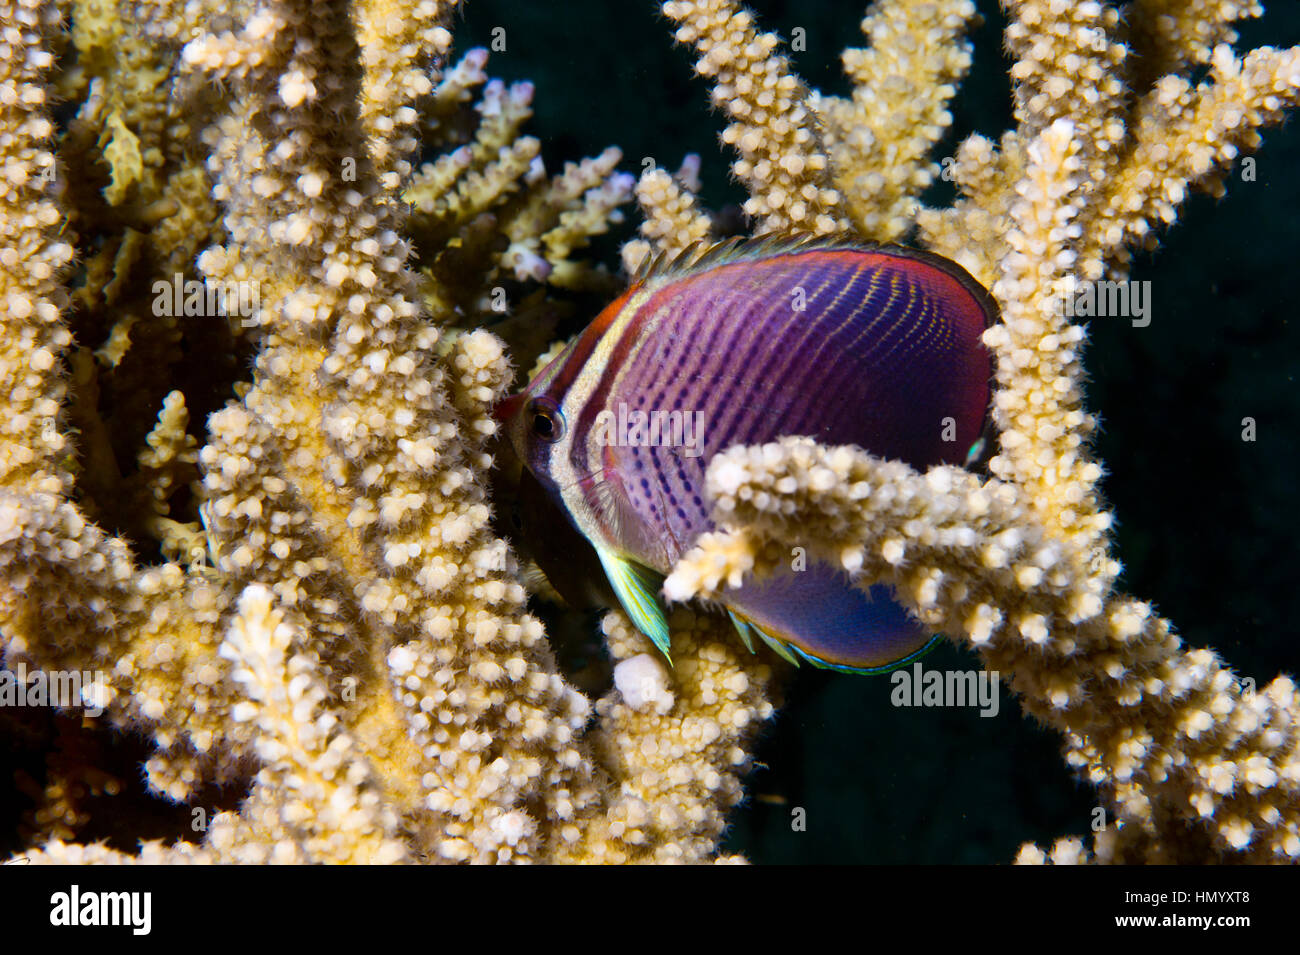 A Triangular Butterfly Fish sheltering in staghorn coral. Stock Photo